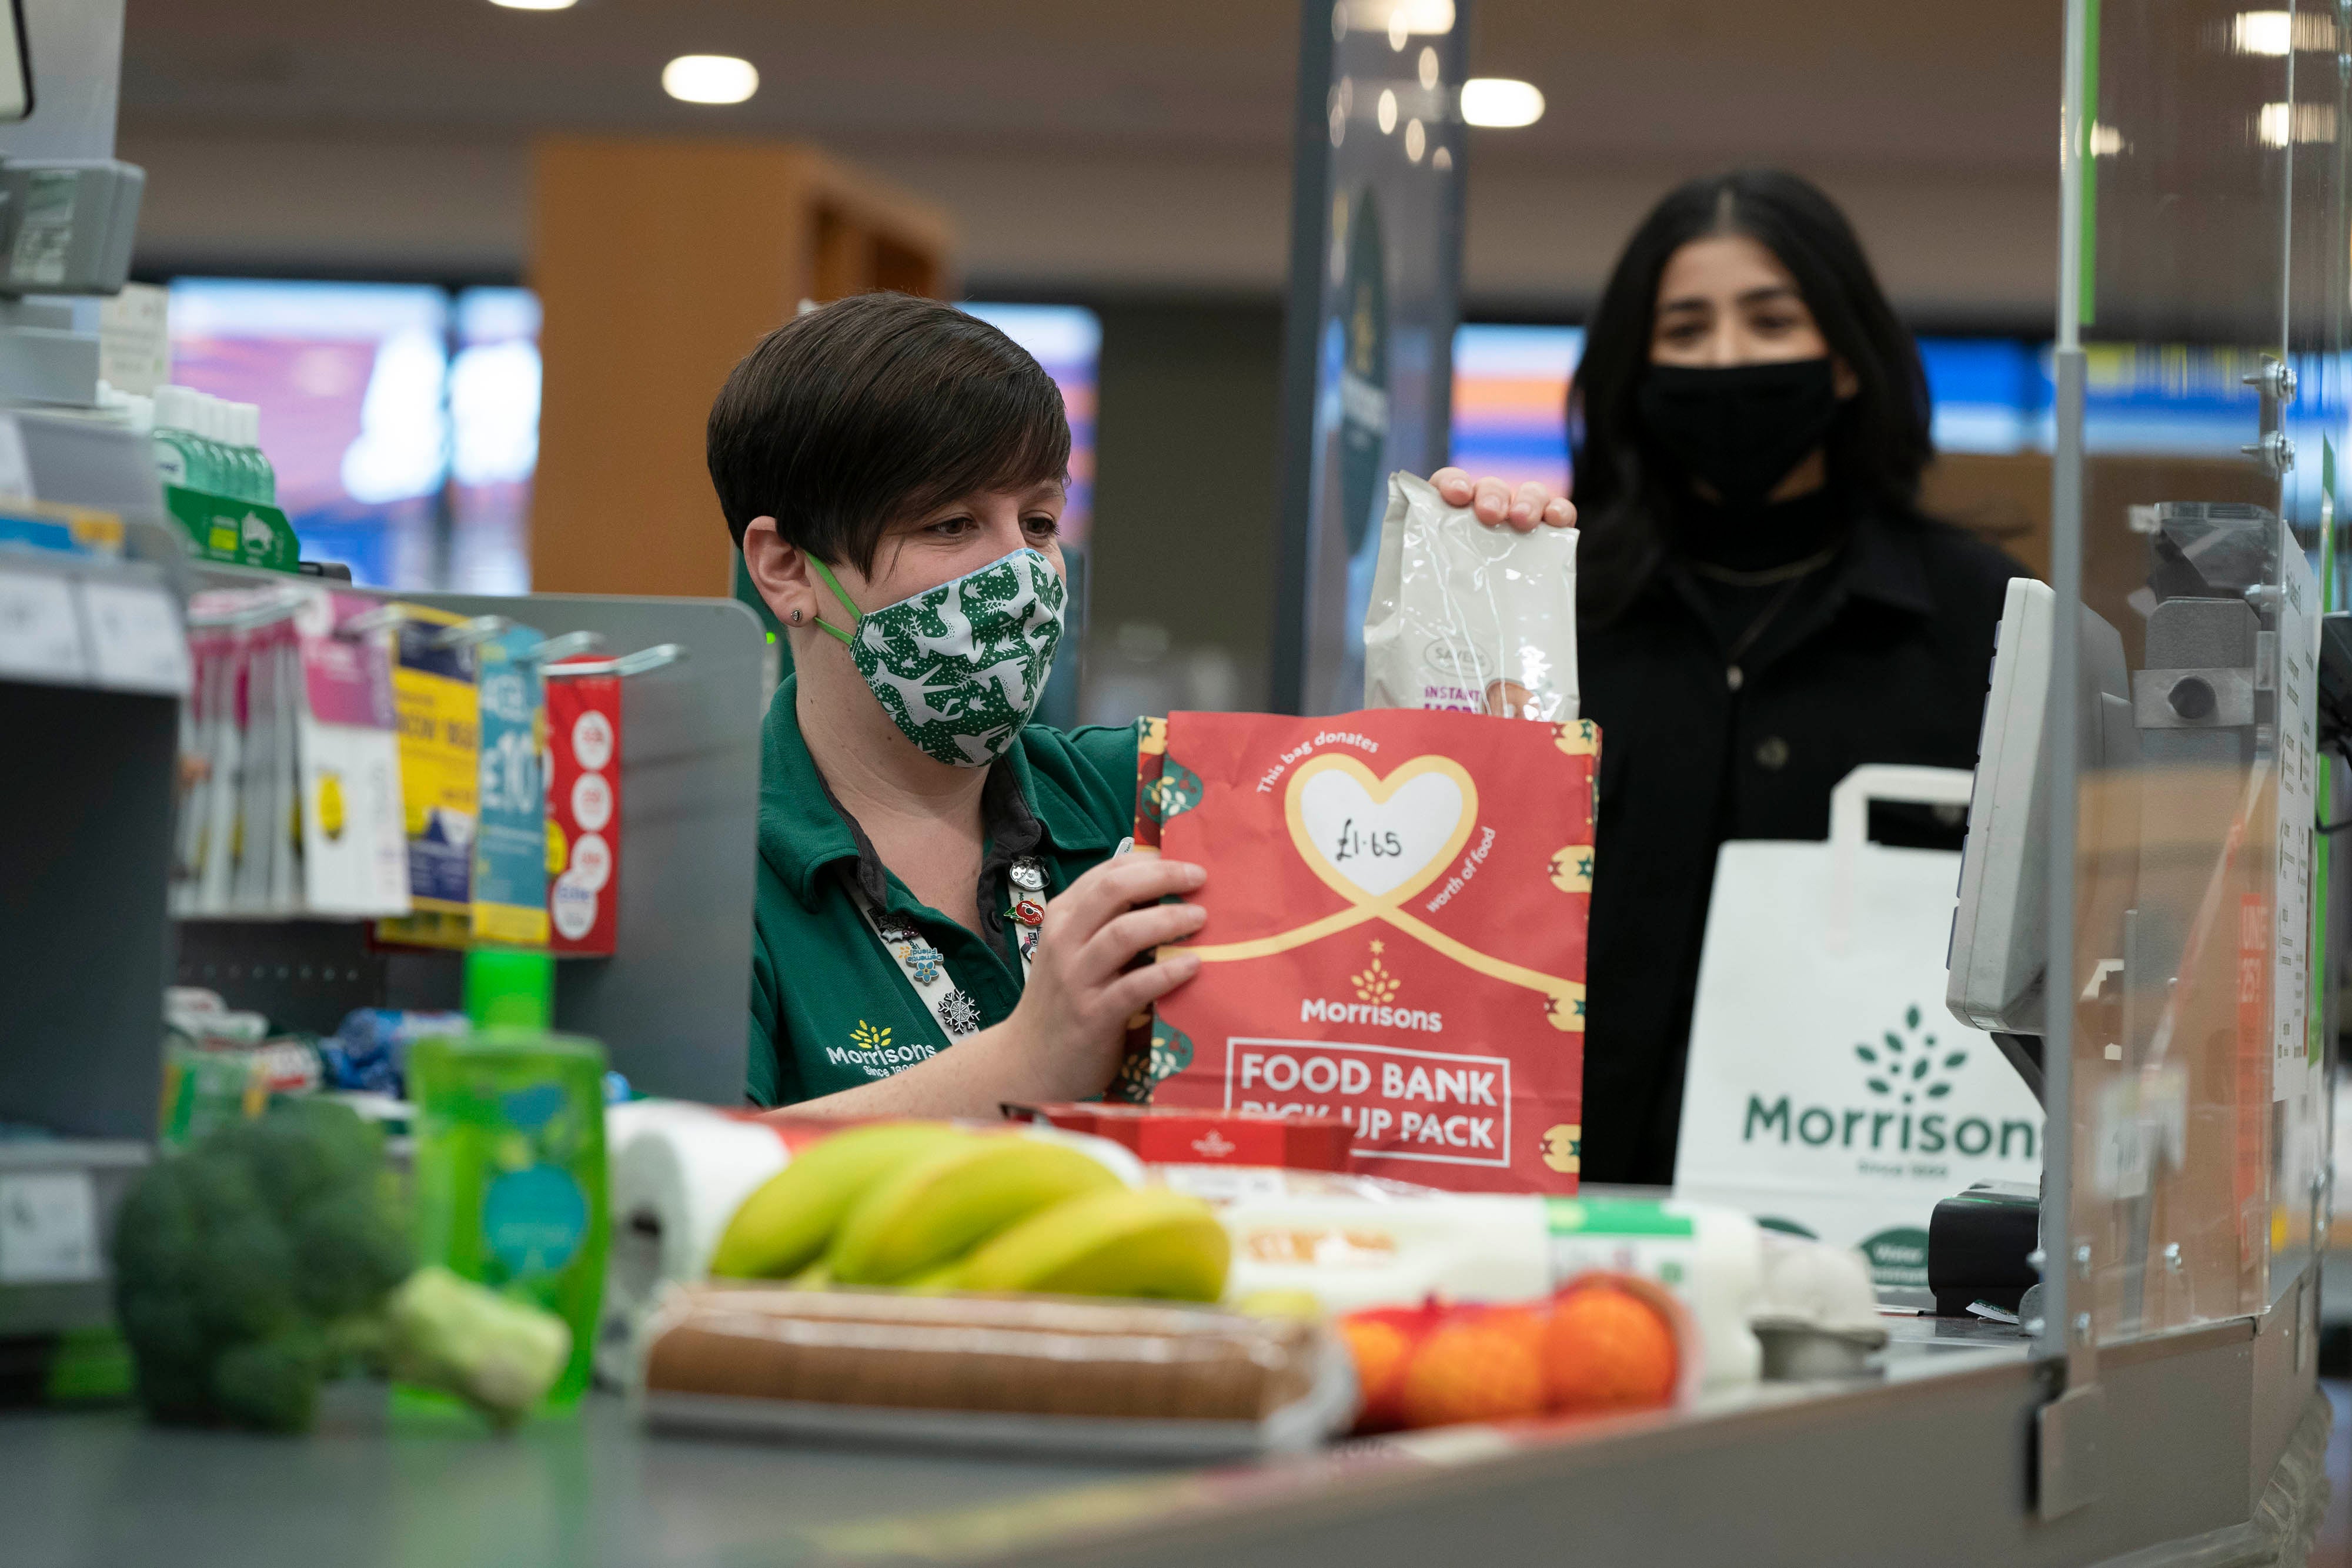 Morrisons has barred entry to customers without masks